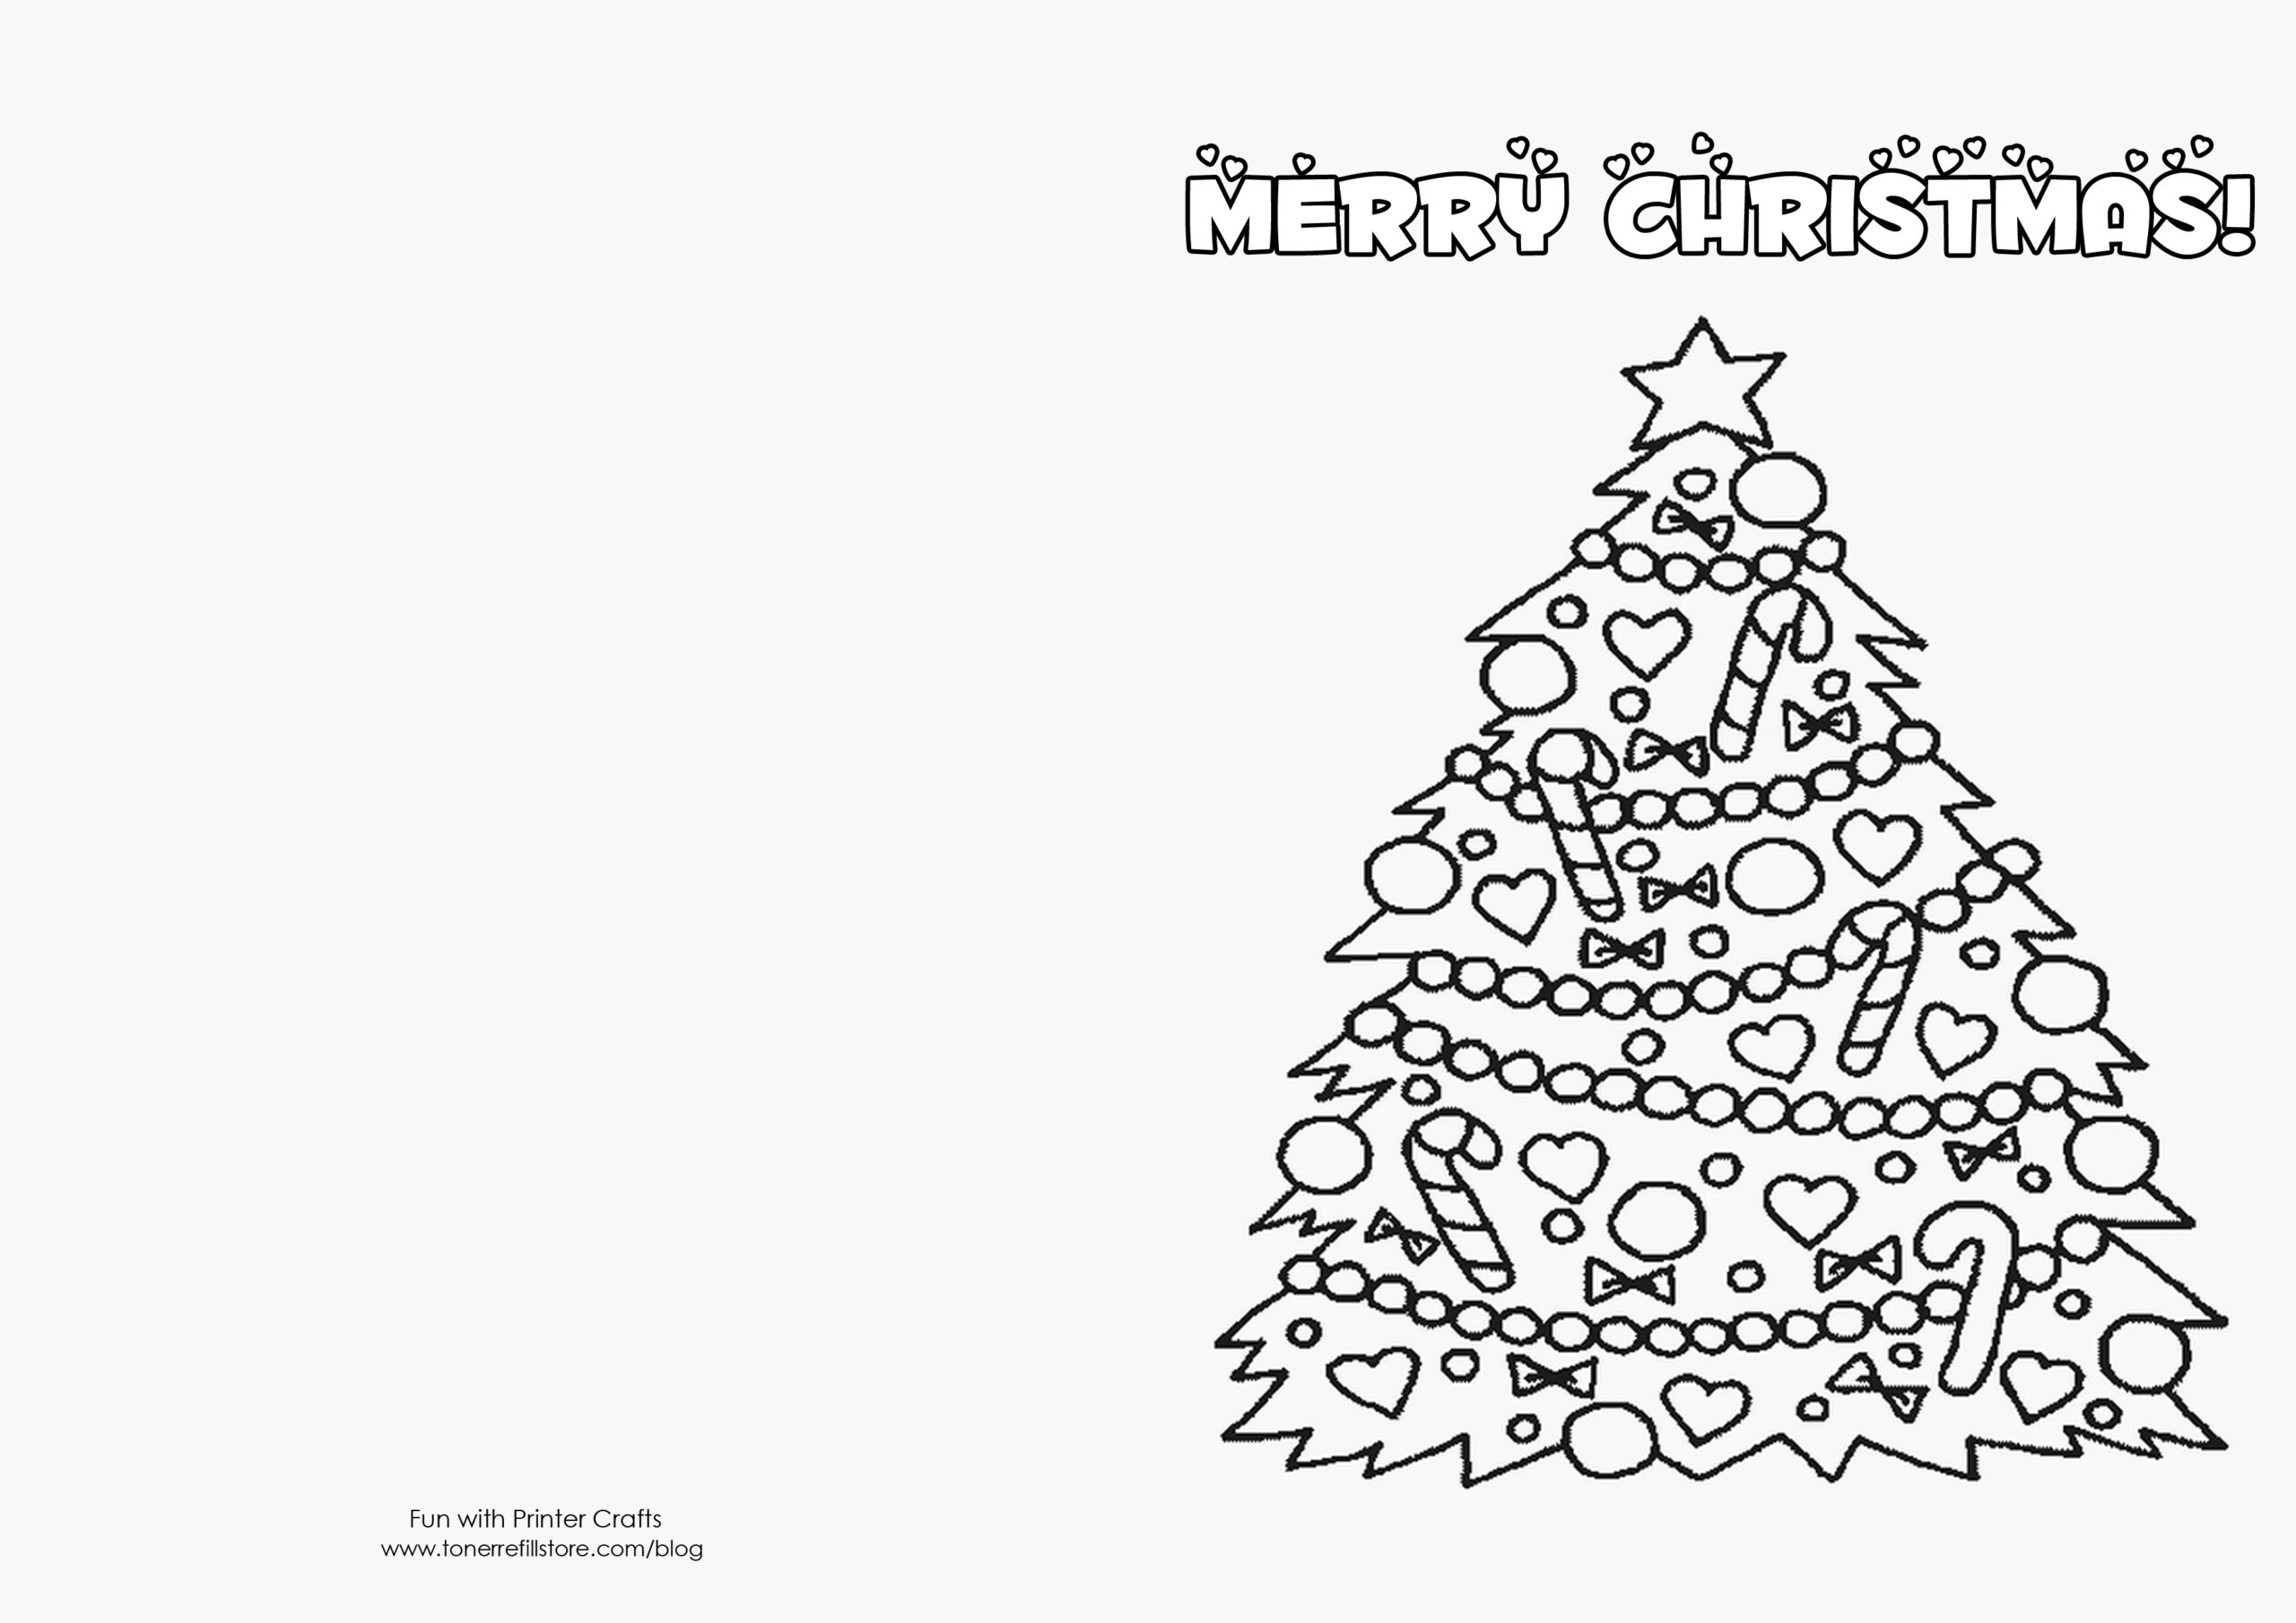 Free Printable Christmas Cards Templates – Zimer.bwong.co Intended For Printable Holiday Card Templates